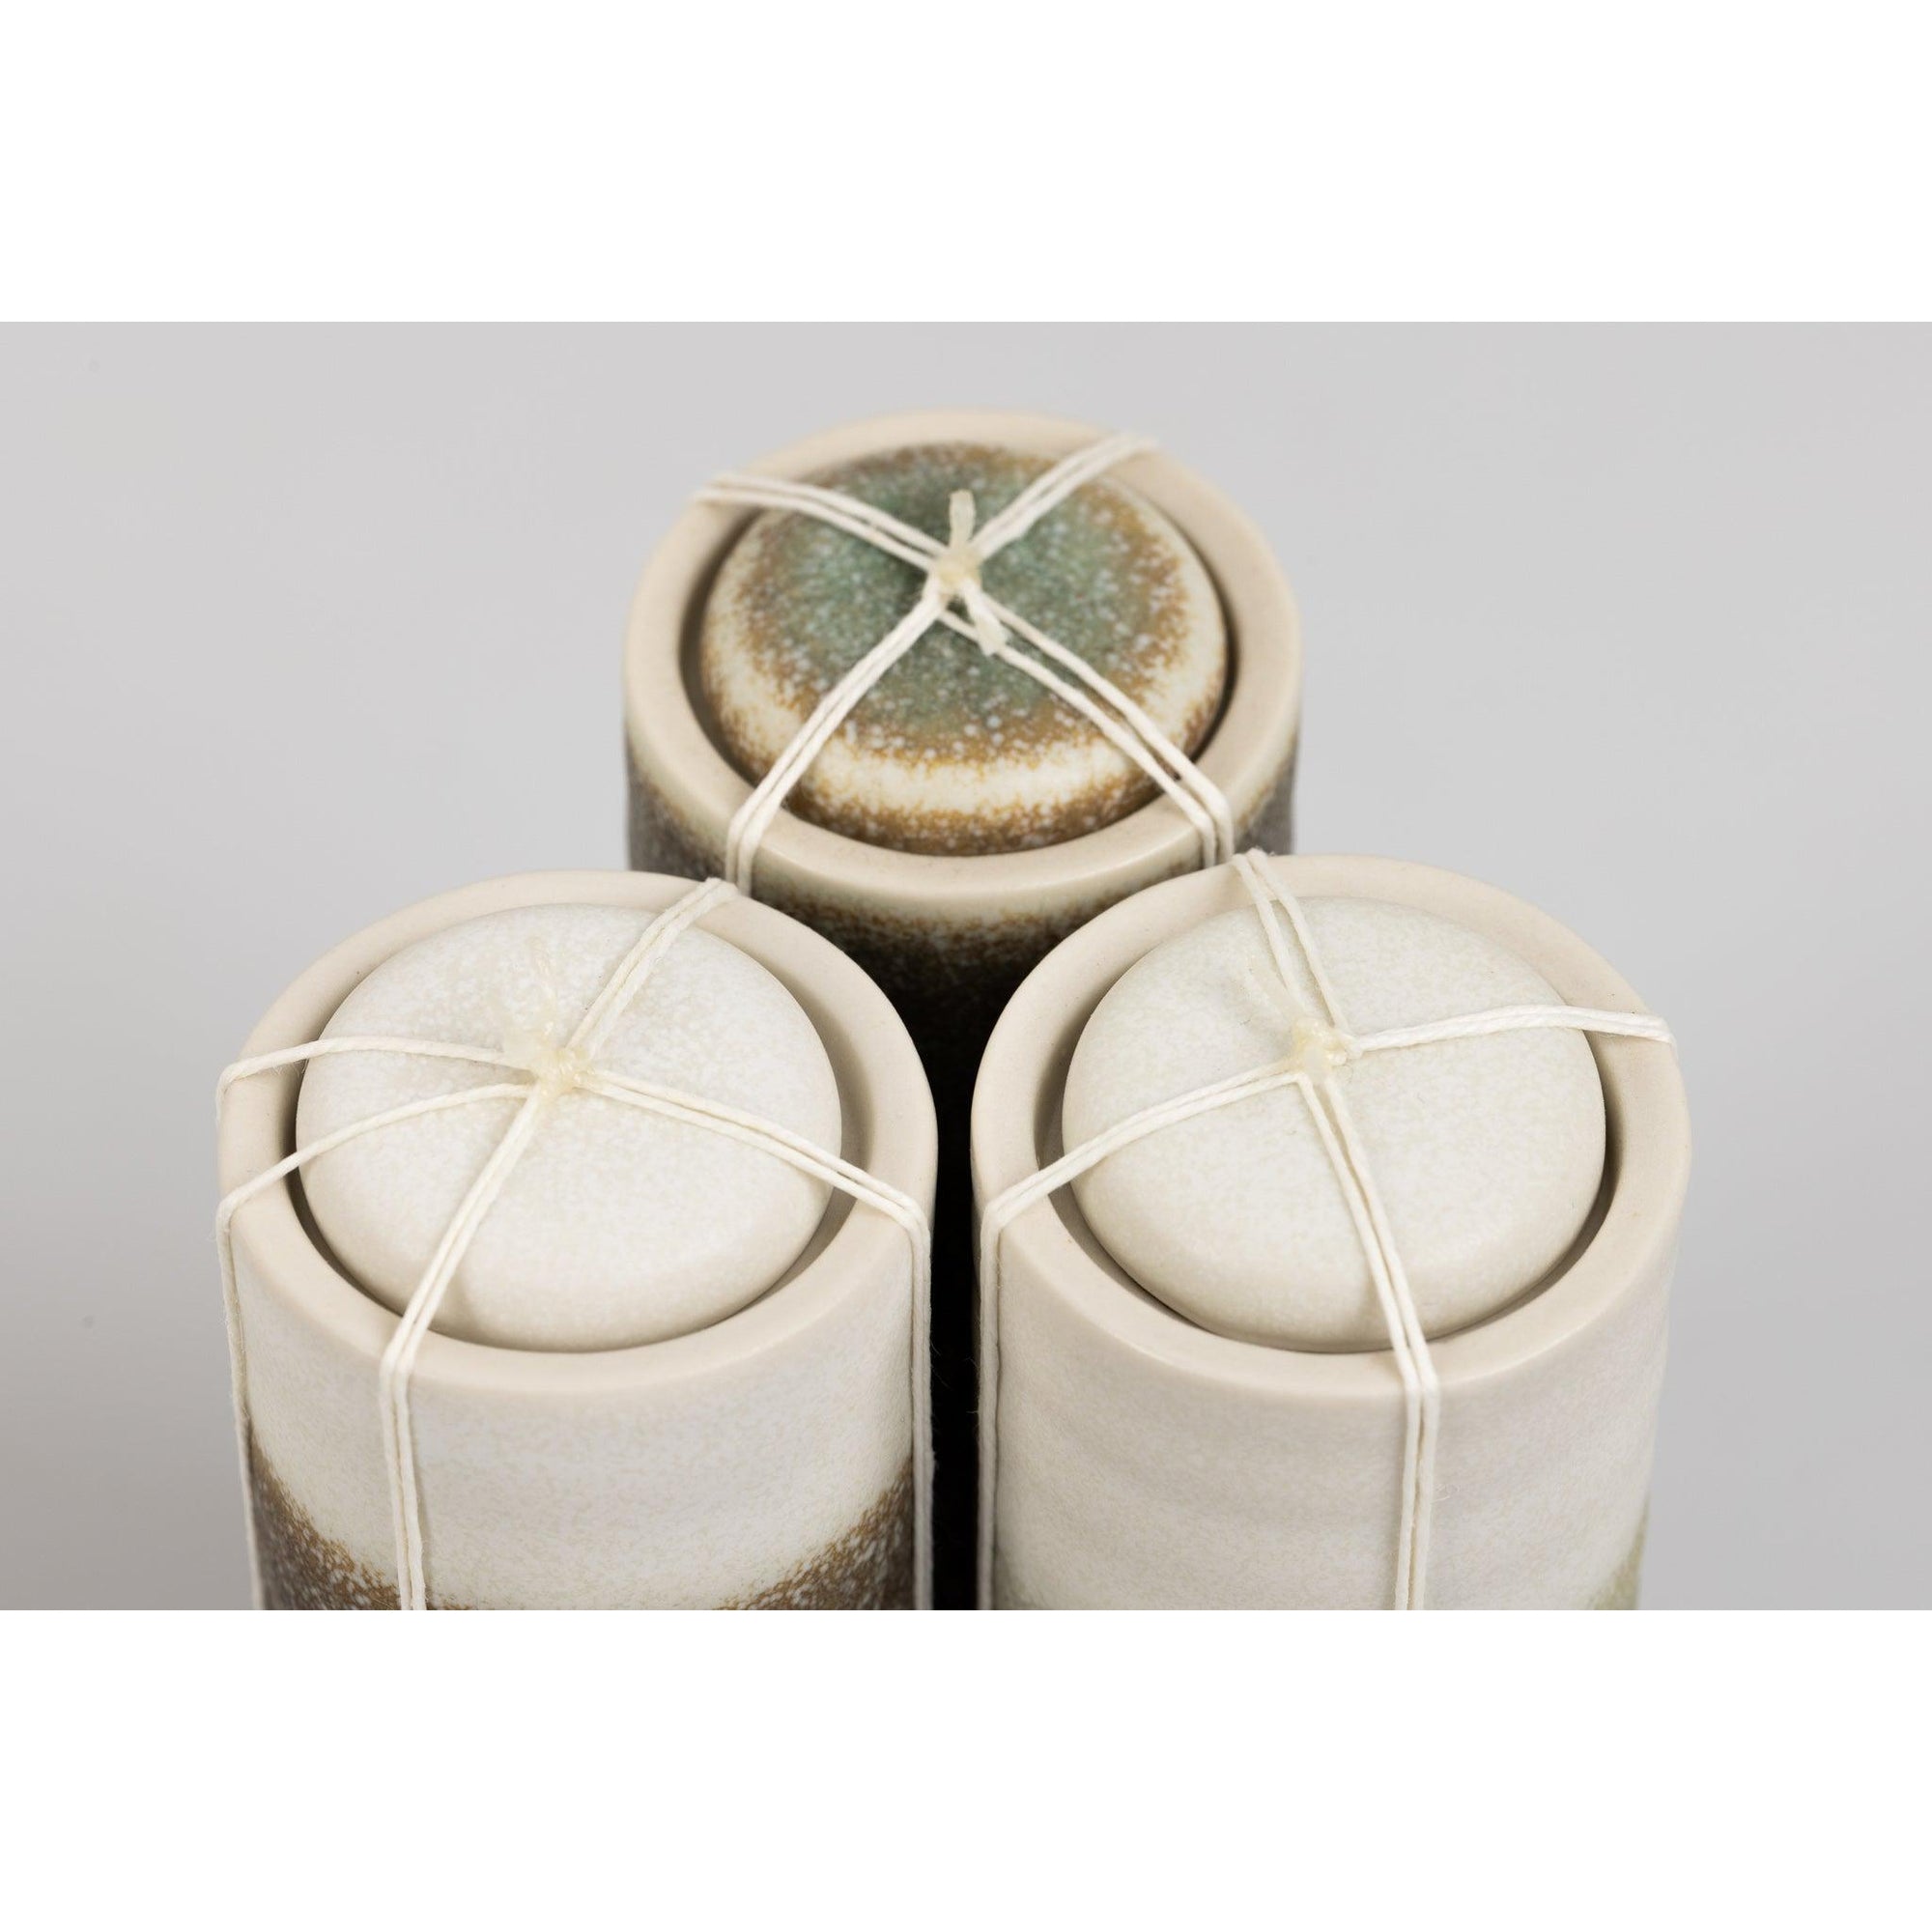 KSJ3 Bound Stoneware Container by Kate Schuricht, available at Padstow Gallery, Cornwall